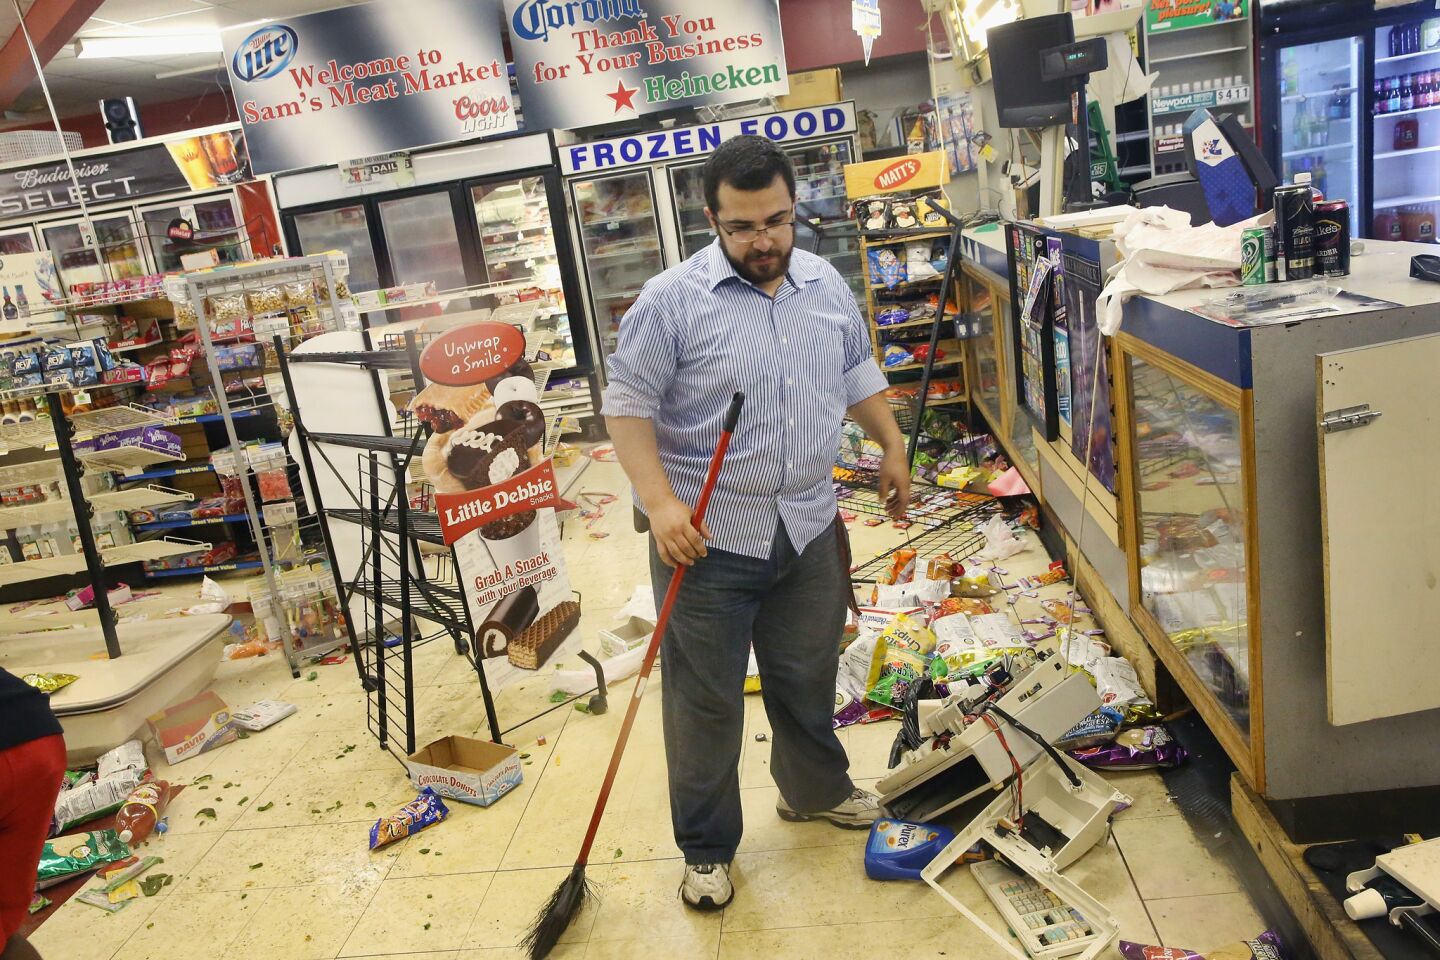 Mustafa Alshalabi cleans up Sam's Meat Market after it was struck by looters overnight.